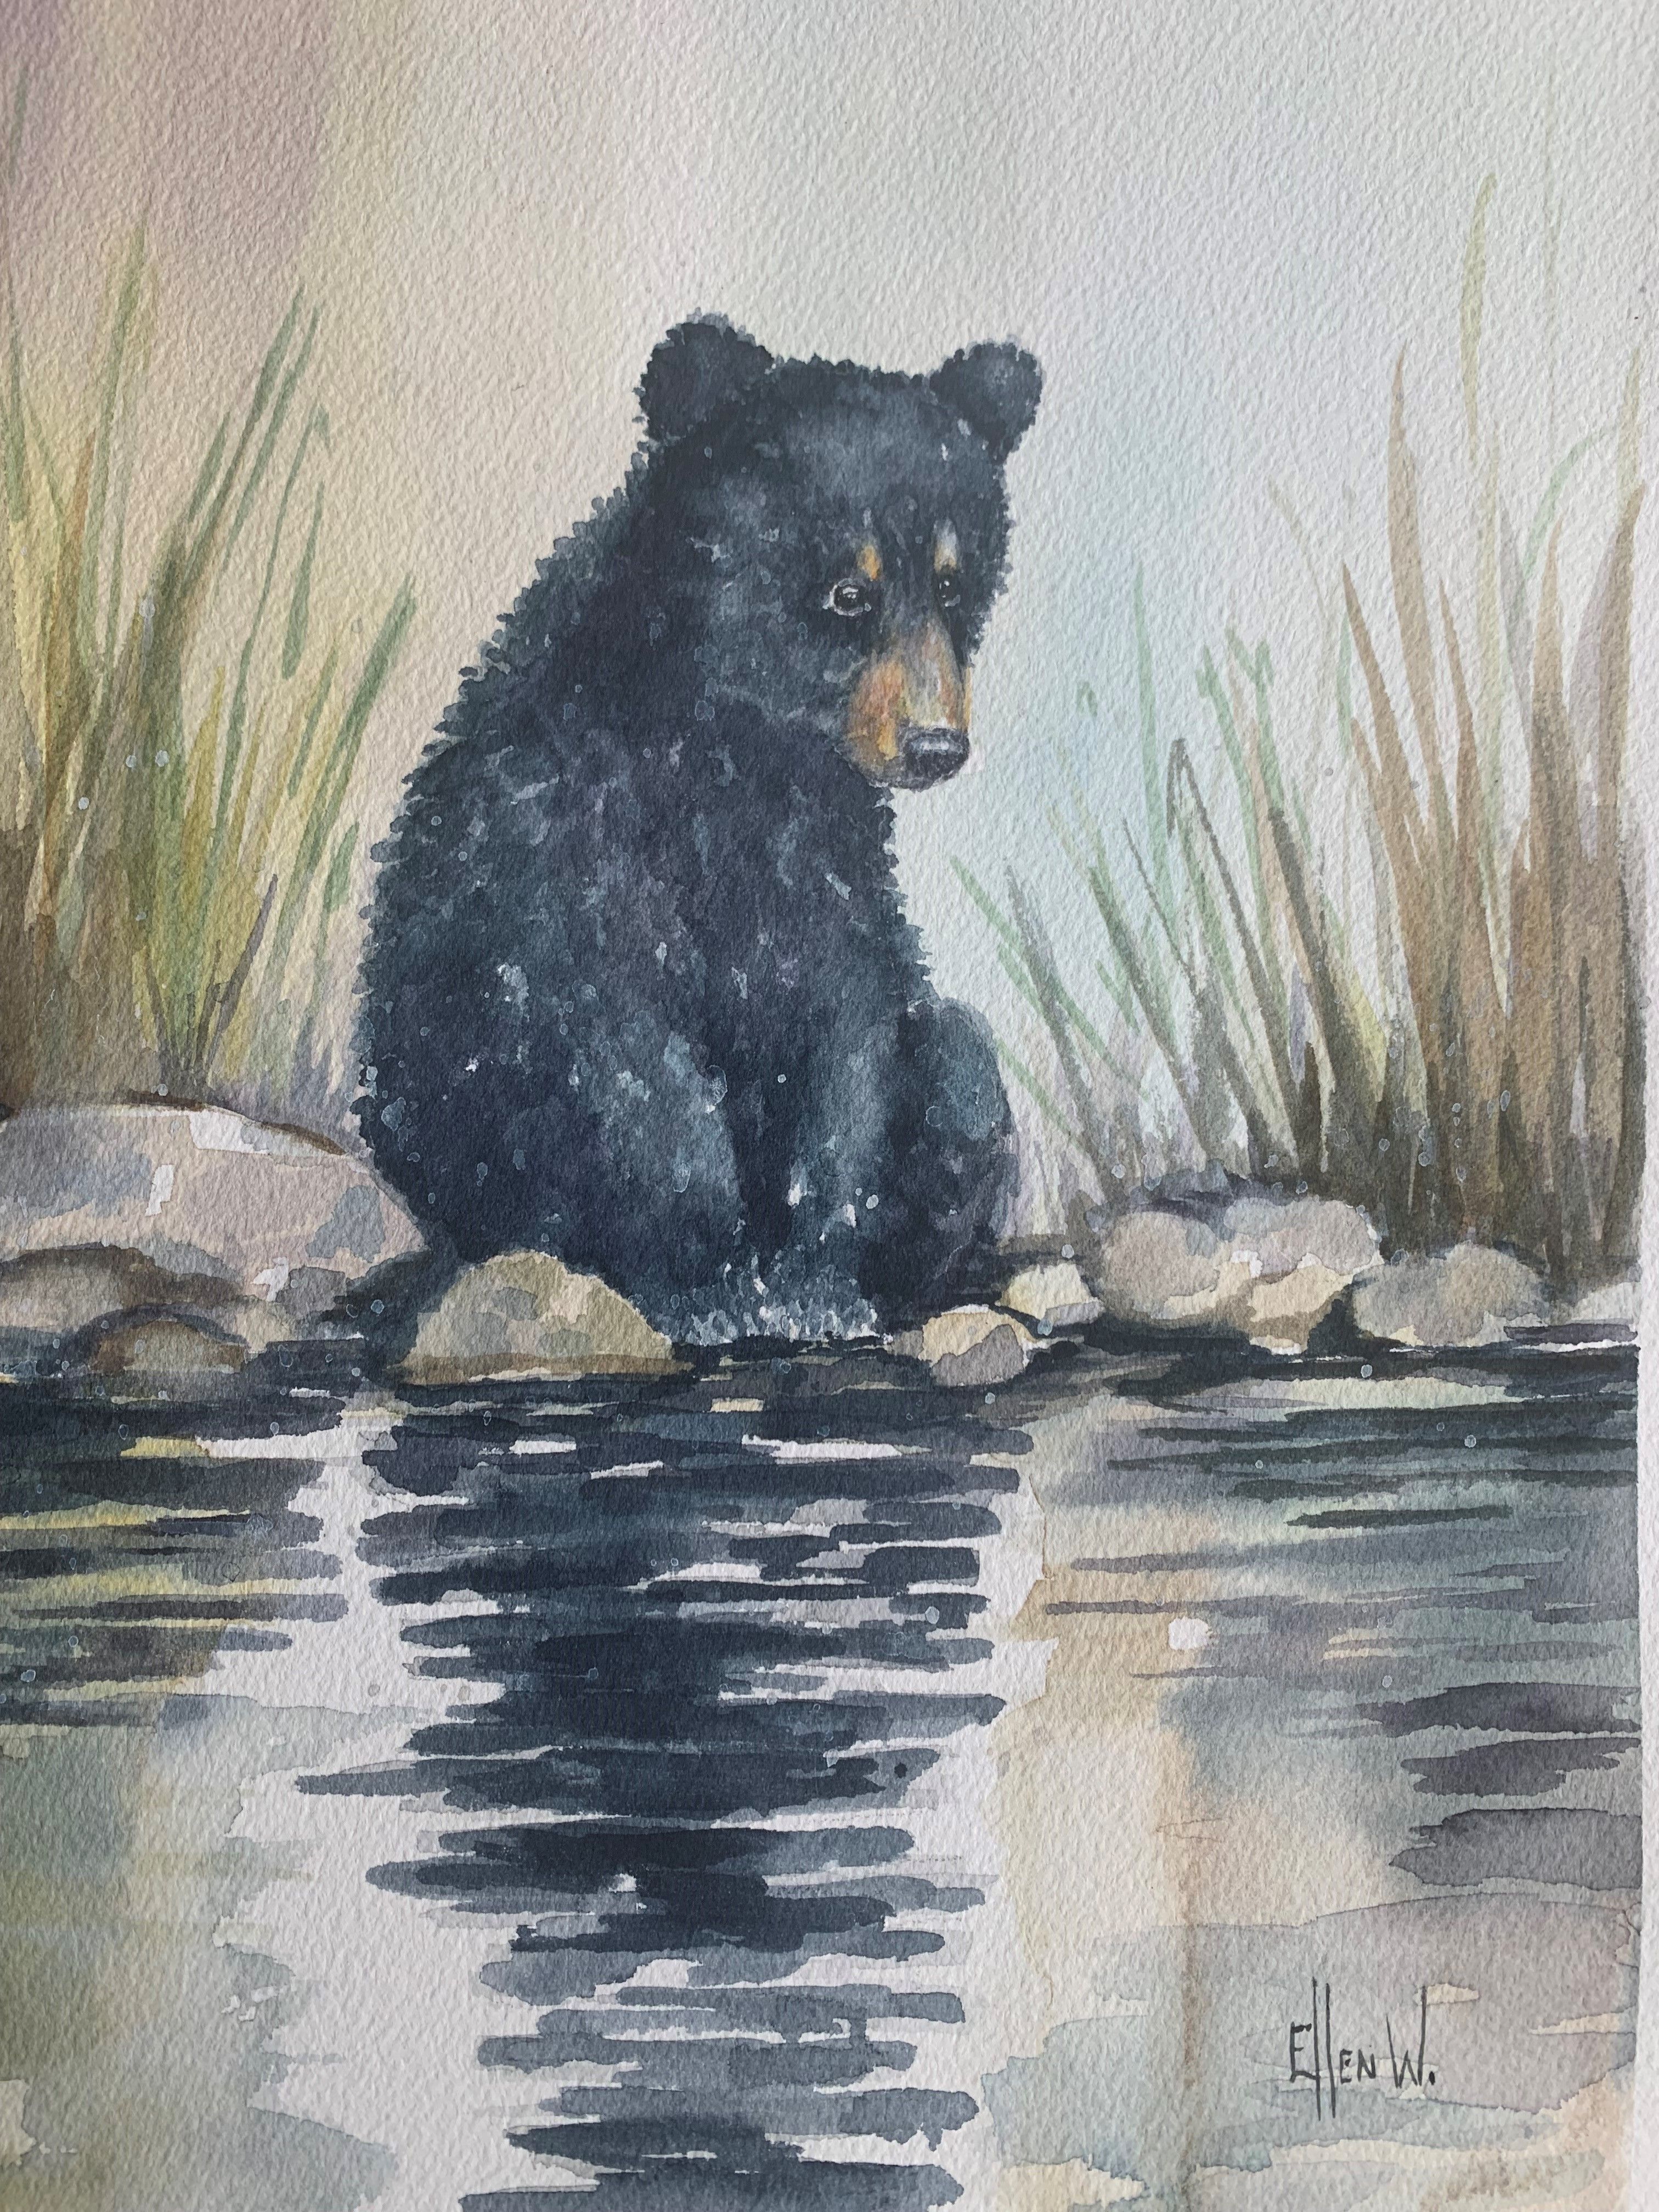 A bear cub is sitting beside a pond looking at its reflection in the water. Small rocks are scattered in the pond edge with various water reeds growing in the background.